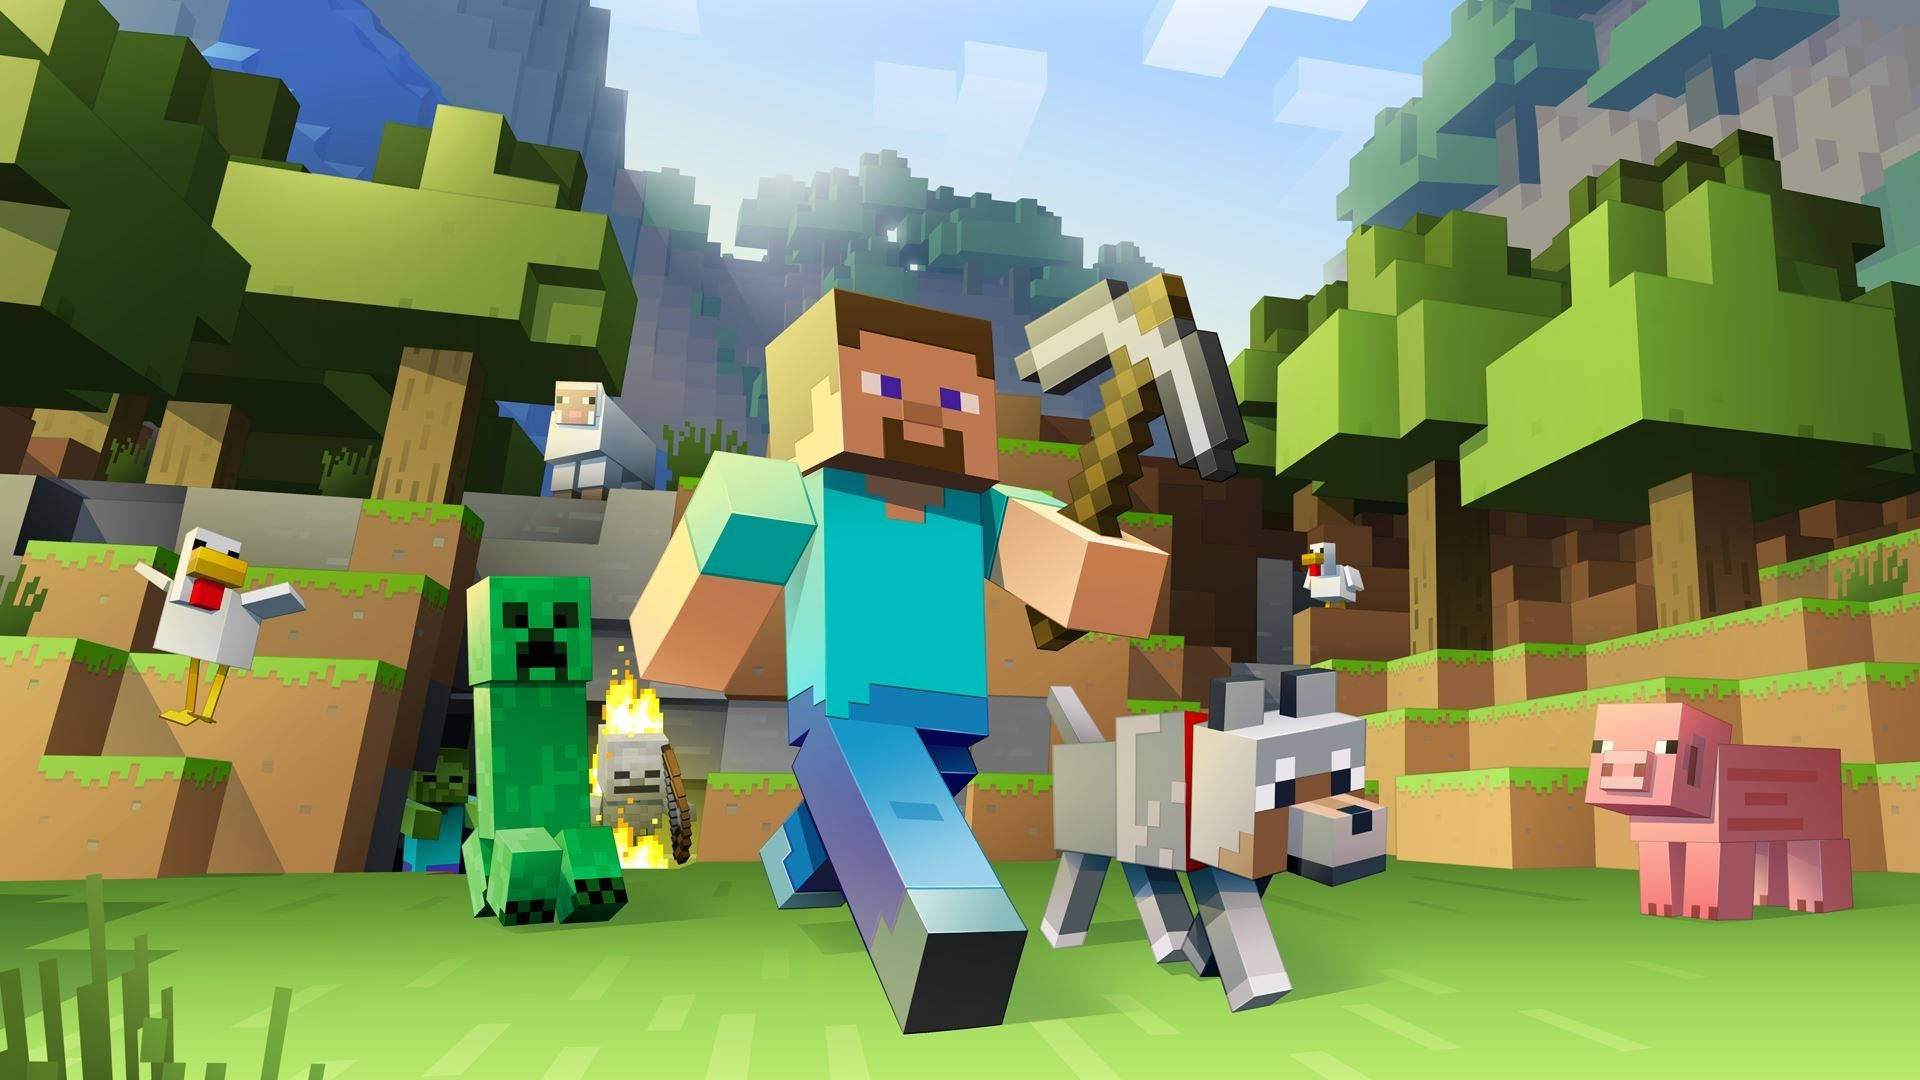 Epic Minecraft the End -   Minecraft wallpaper, Minecraft anime,  Minecraft drawings